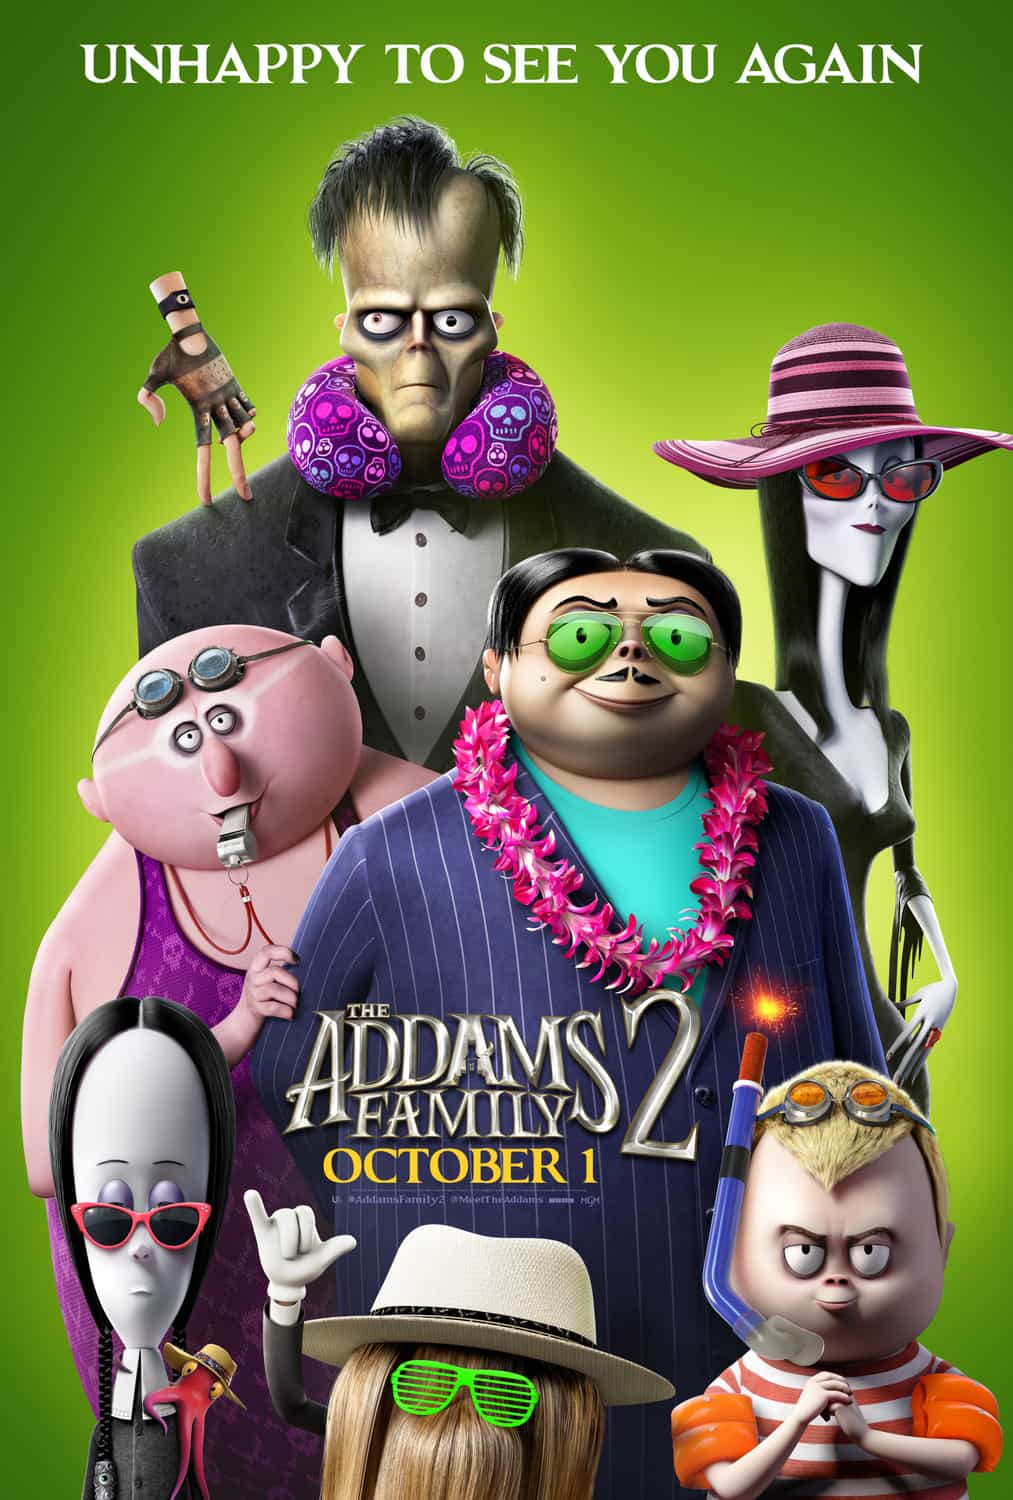 New movie preview UK weekend Friday 8th October 2021 - The Addams Family 2 and Pokemon the Movie: Secrets of the Jungle